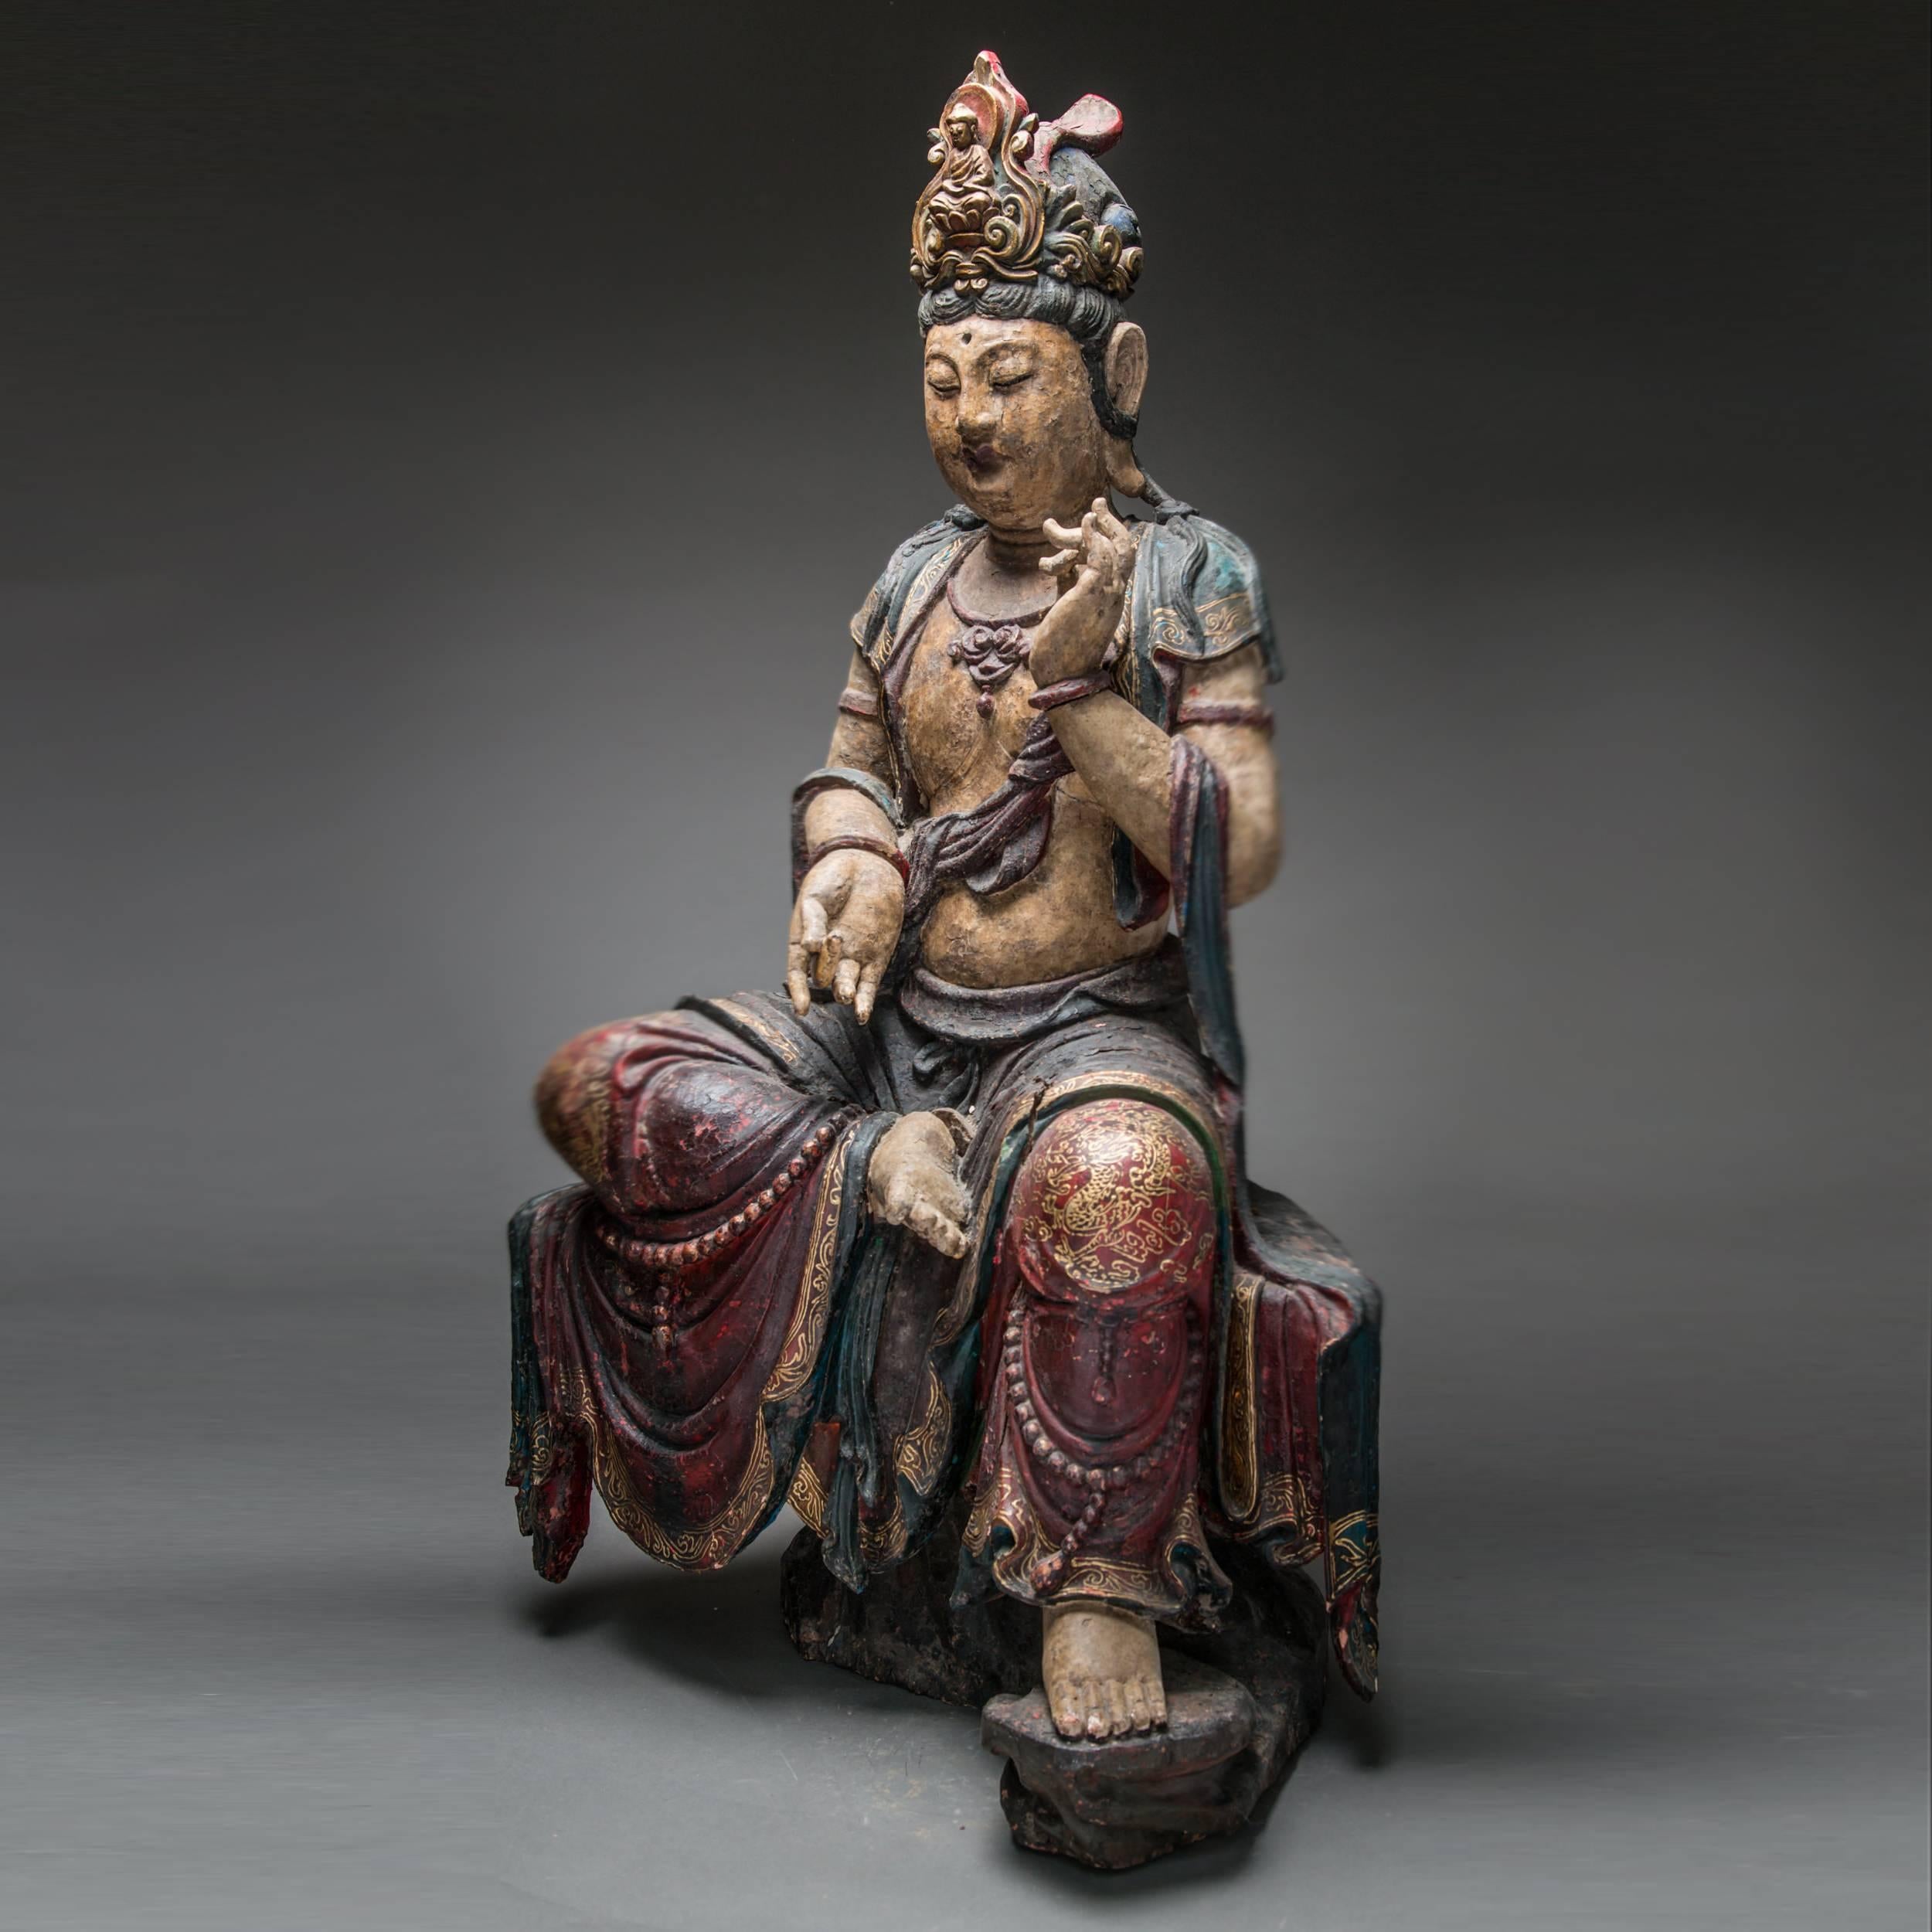 Buddhism was introduced to China from India in the early years of the first millennium. This statue represents the bodhisattva of mercy, known as Avalokiteshvara (or Guanyin in Chinese). Bodhisattvas were originally depicted as the Buddha’s